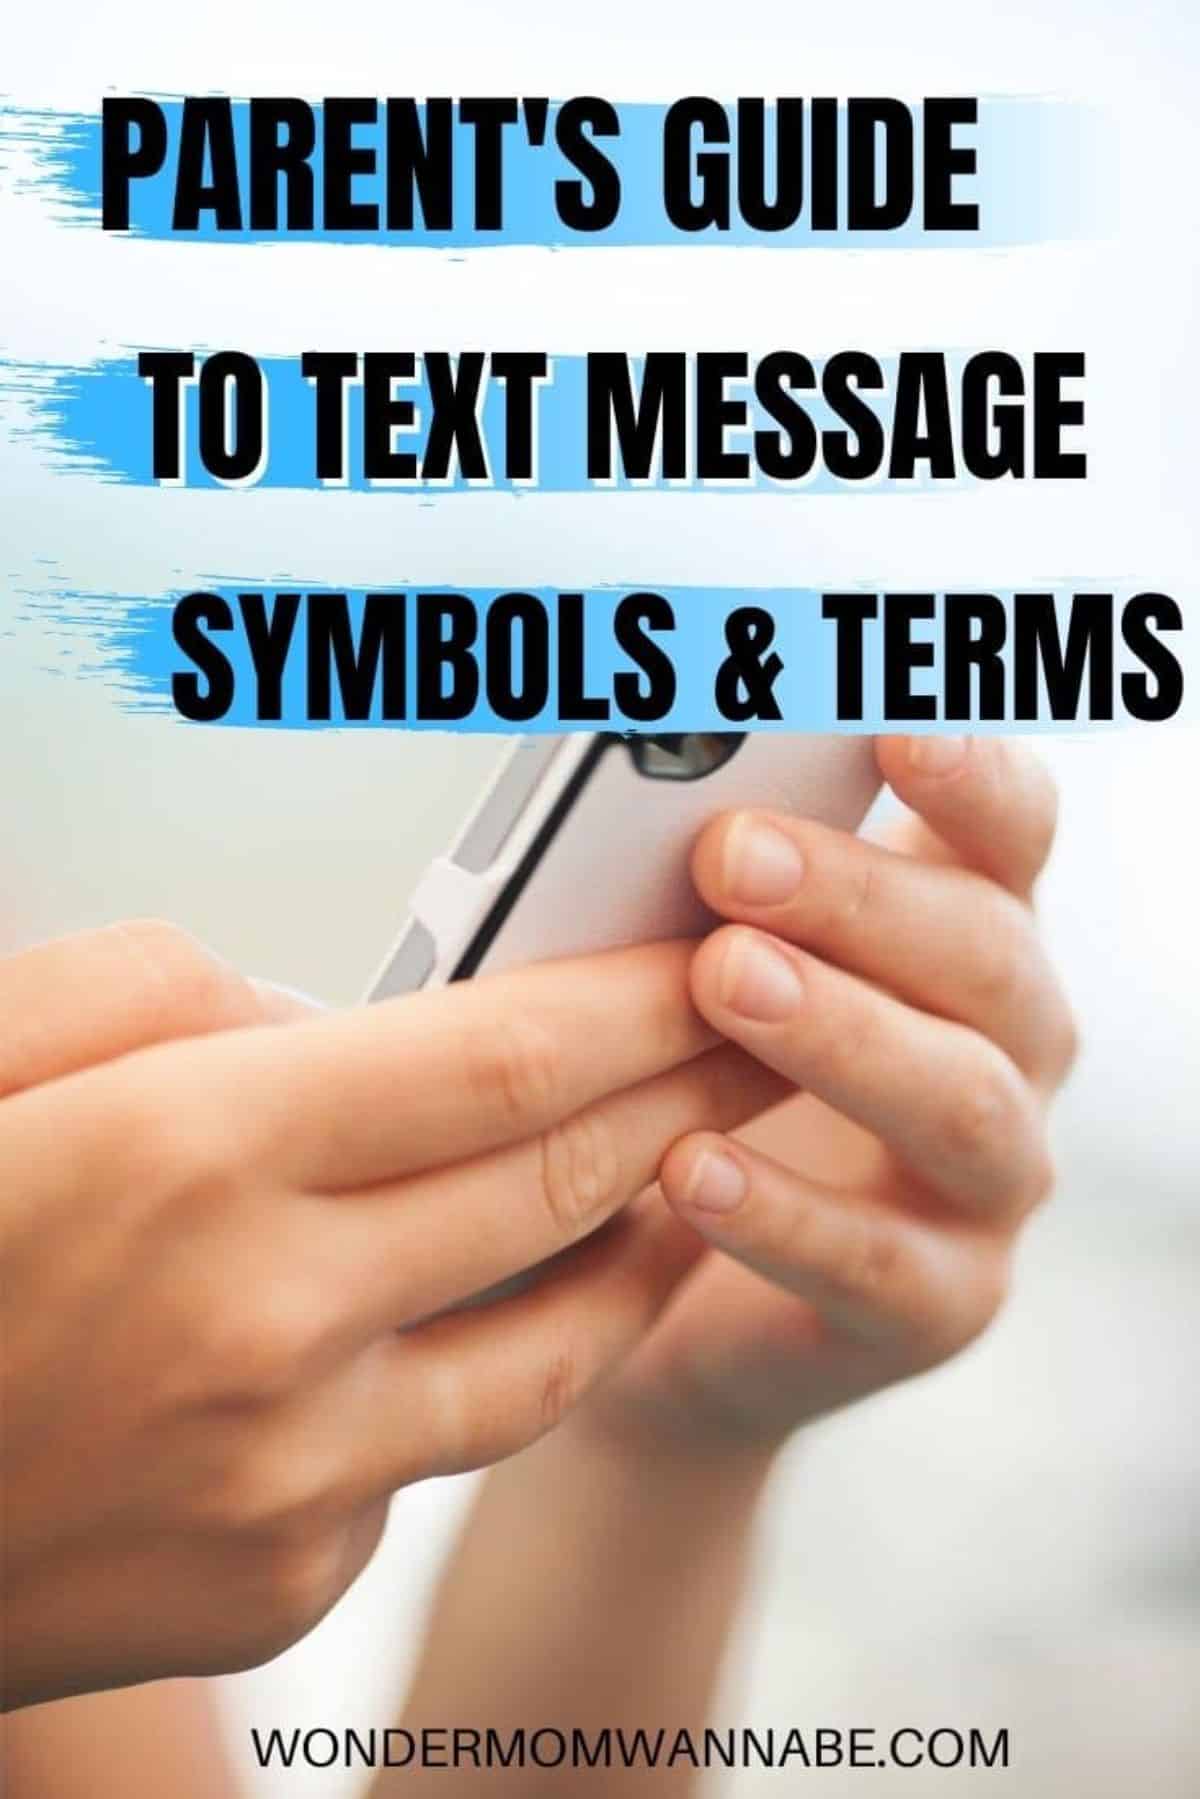 hands holding a cell phone with title Parent's Guide to Text Message Symbols & Terms.